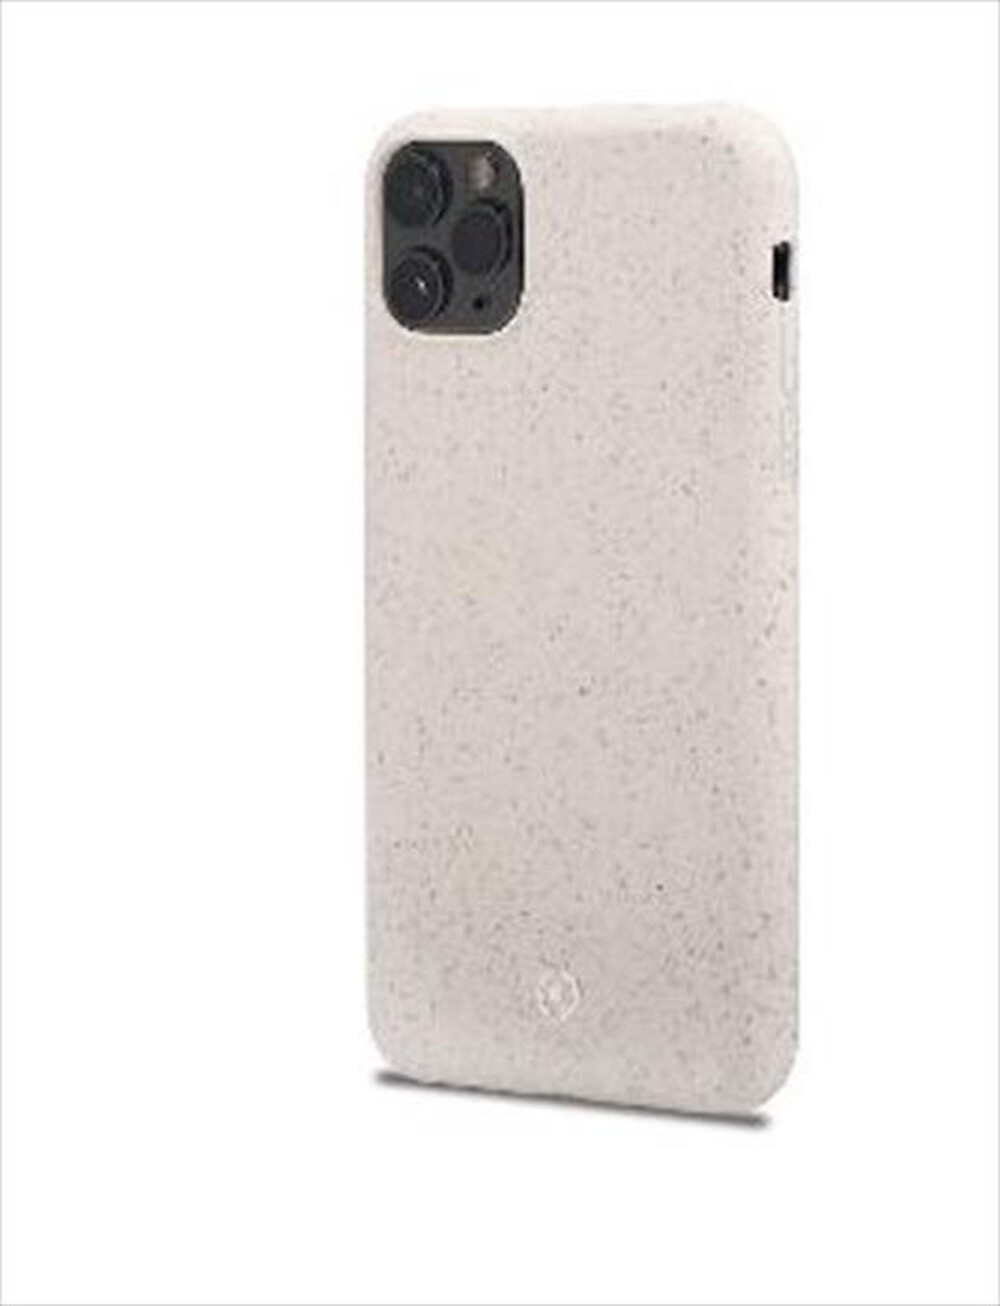 "CELLY - EARTH992WH-EARTH GALAXY S20-Bianco/Mais"